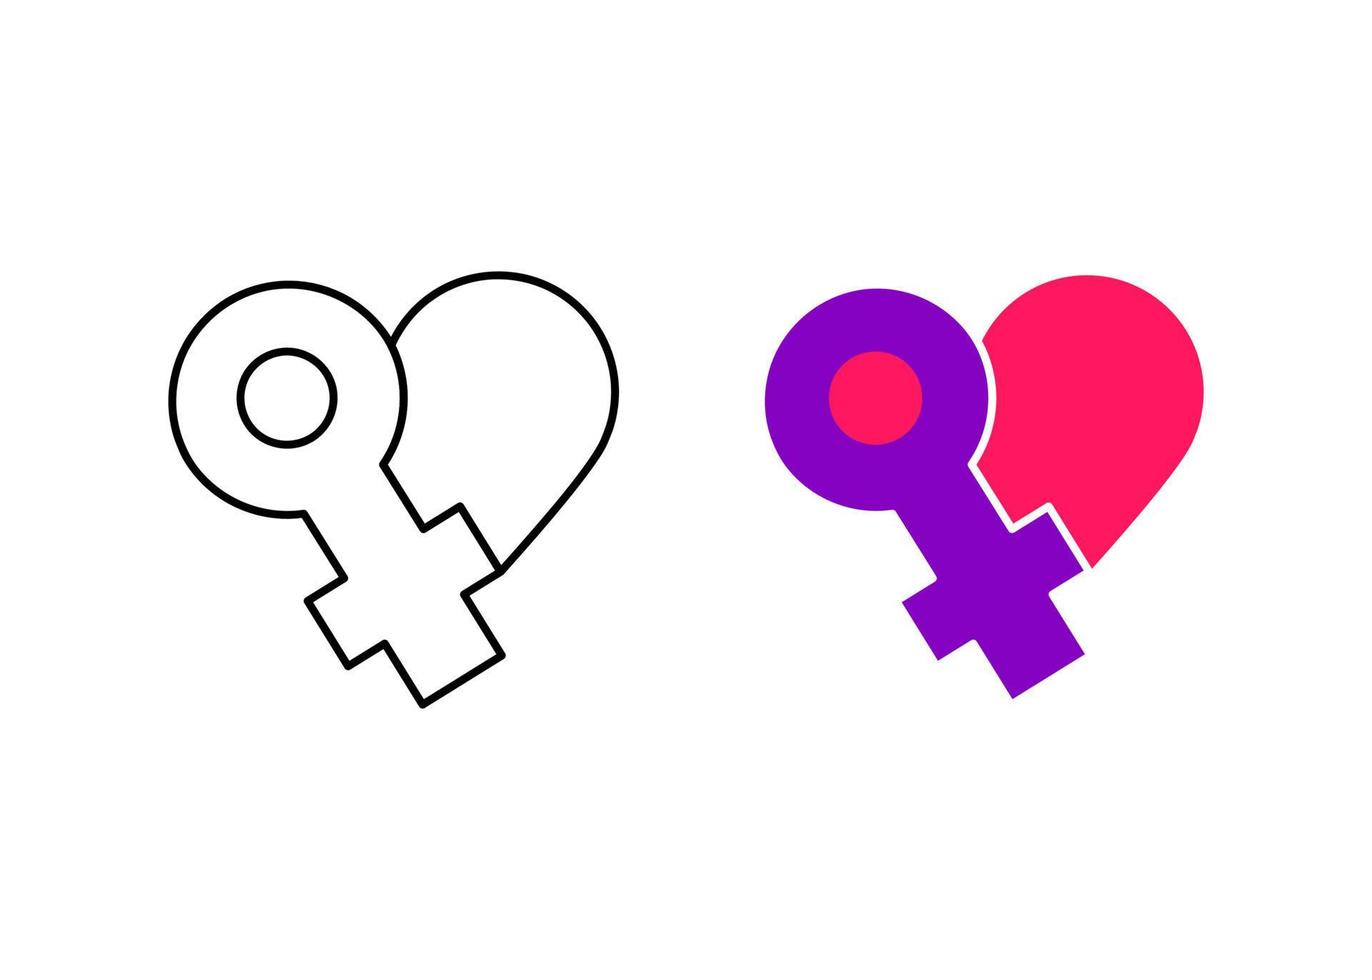 Modern heart next to woman icon set. Women's day symbol from modern heart icons. Heart template with linear and colorful female icon. Simple linear vector white background.